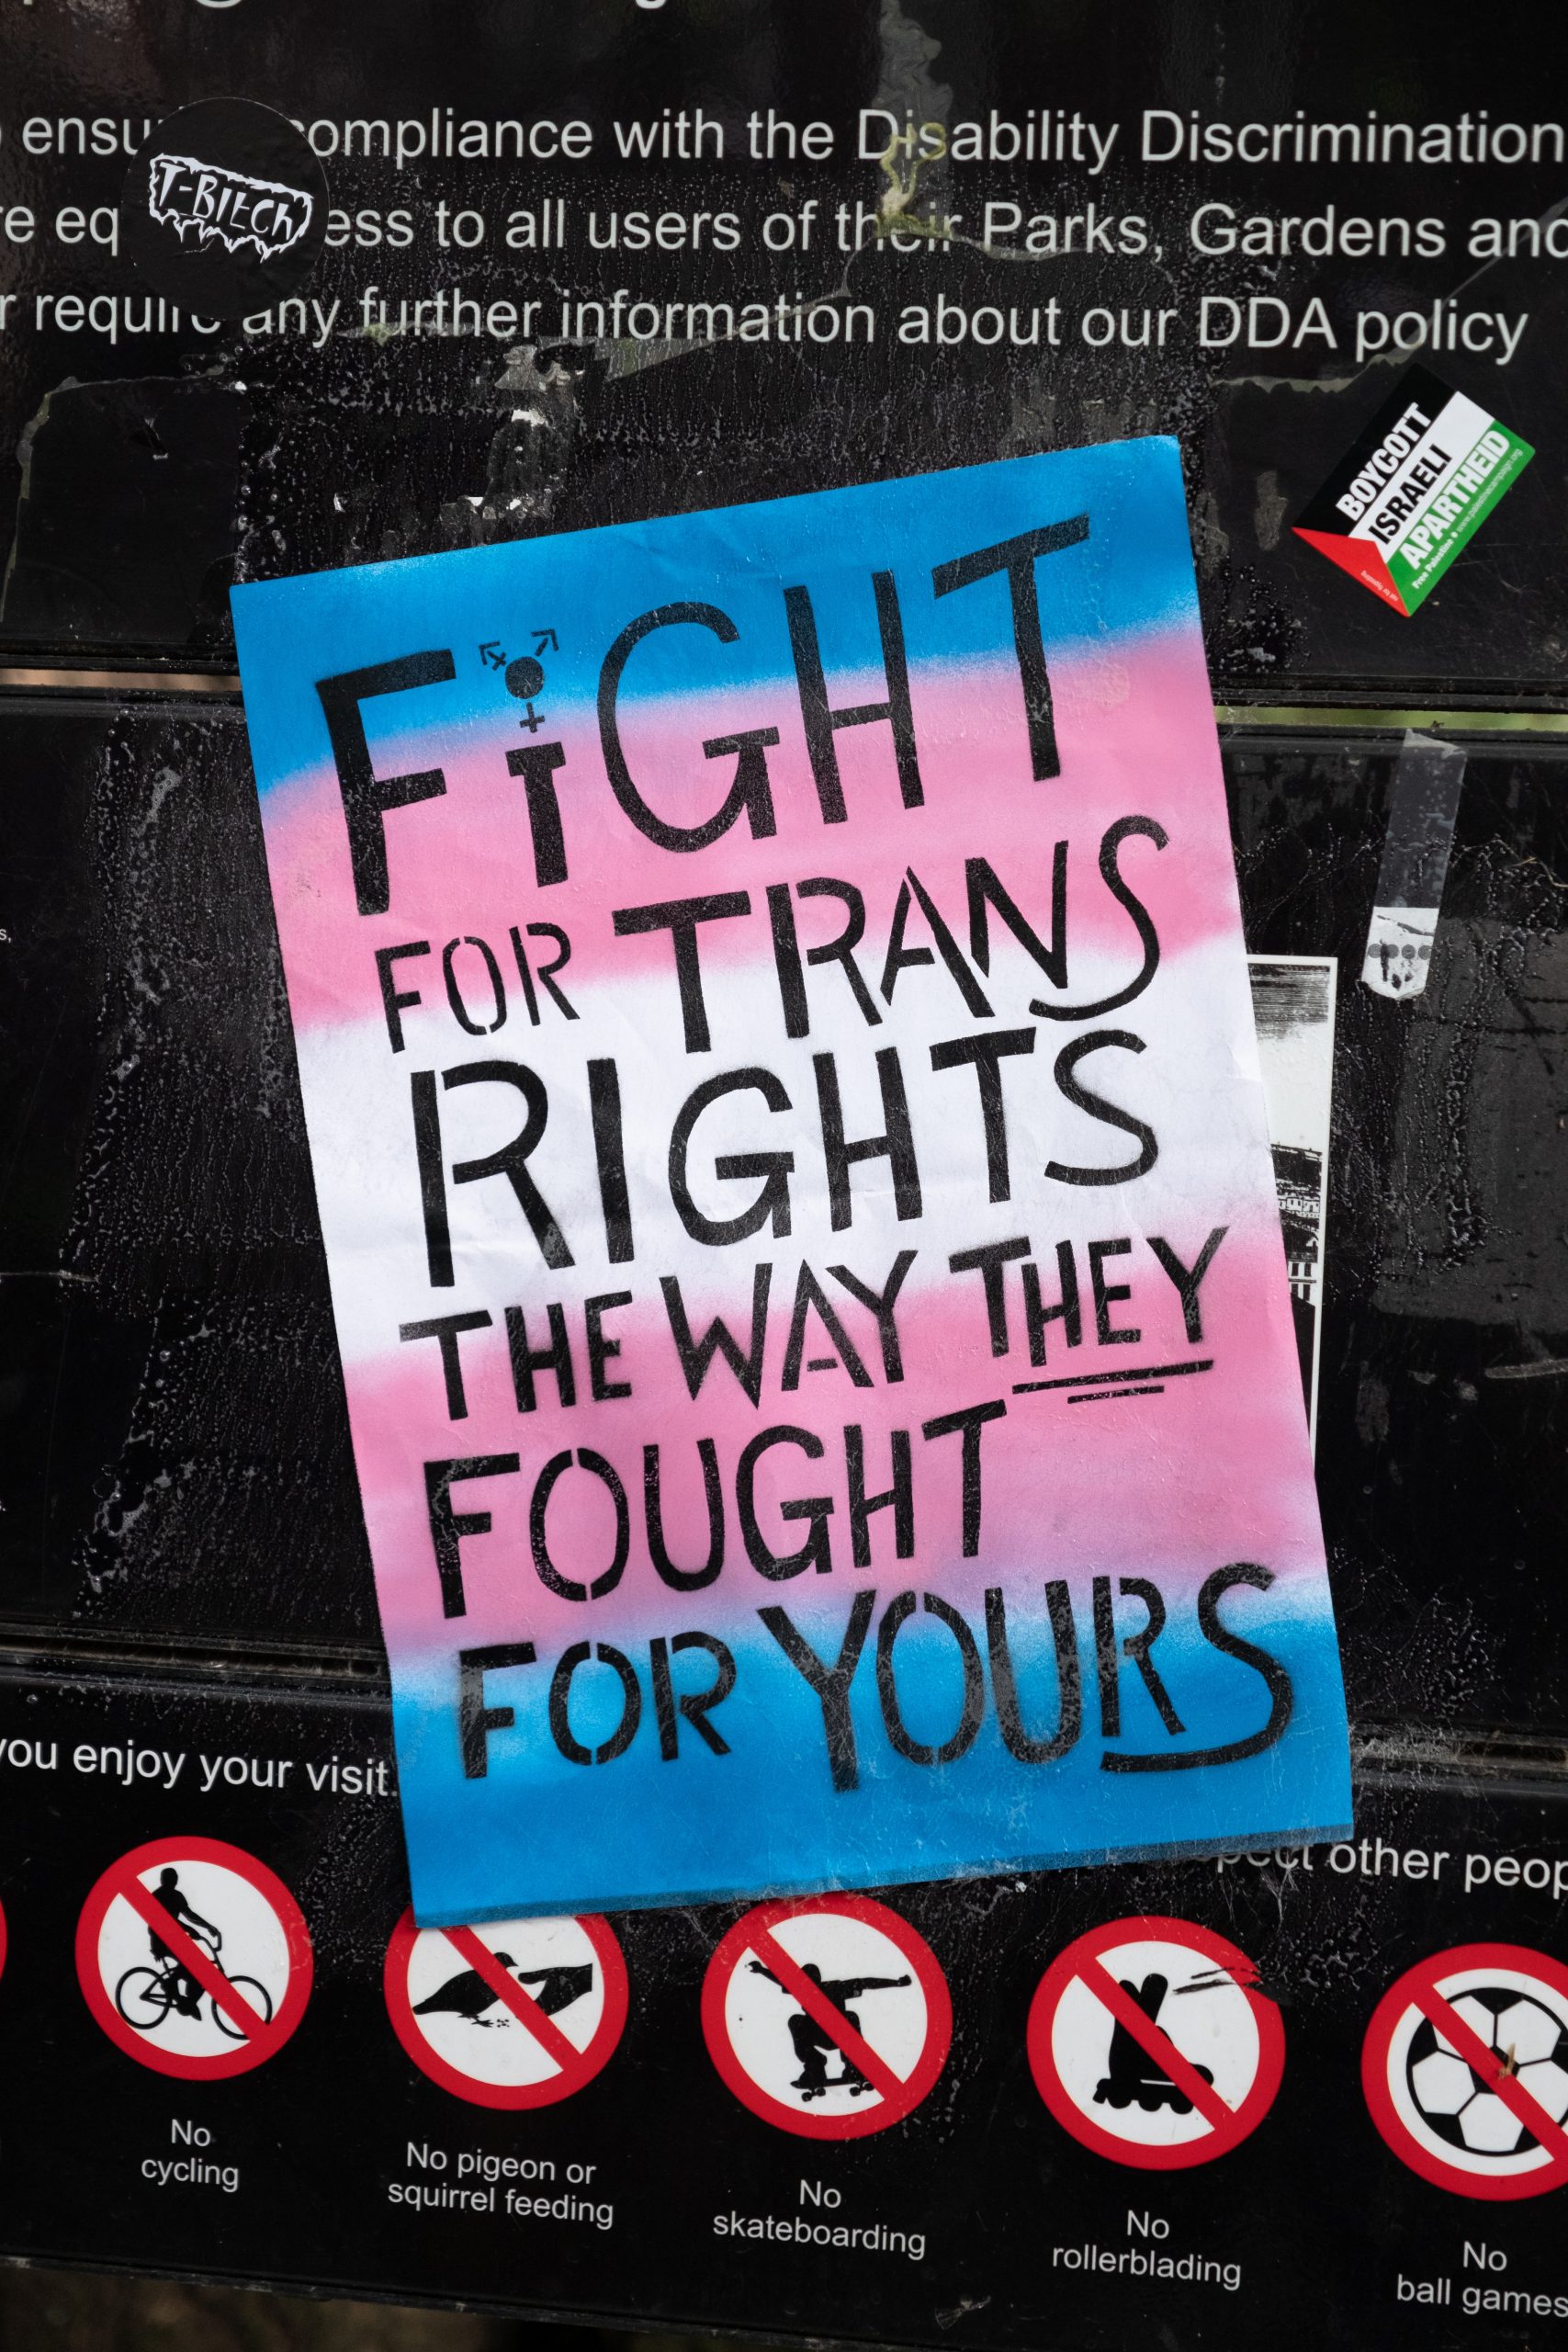 A protest sign painted in the trans flag colours reads "fight for trans rights the way they fought for yours" in black lettering.